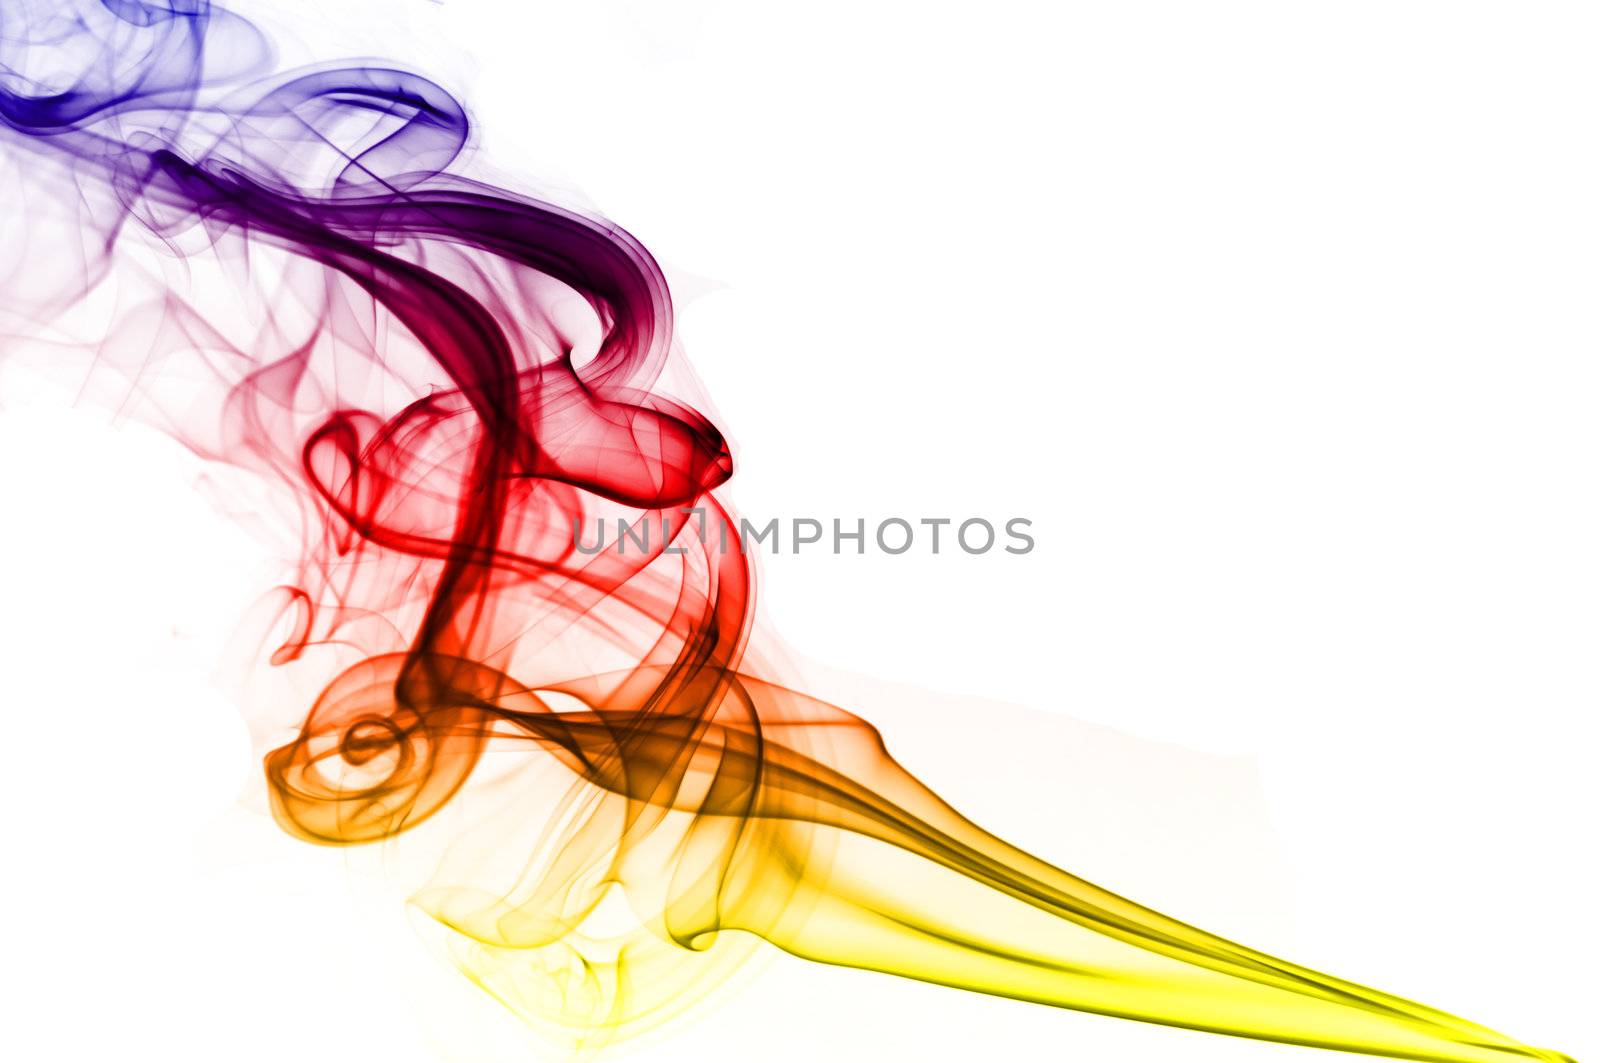 colored smoke isolated on white background by TanawatPontchour